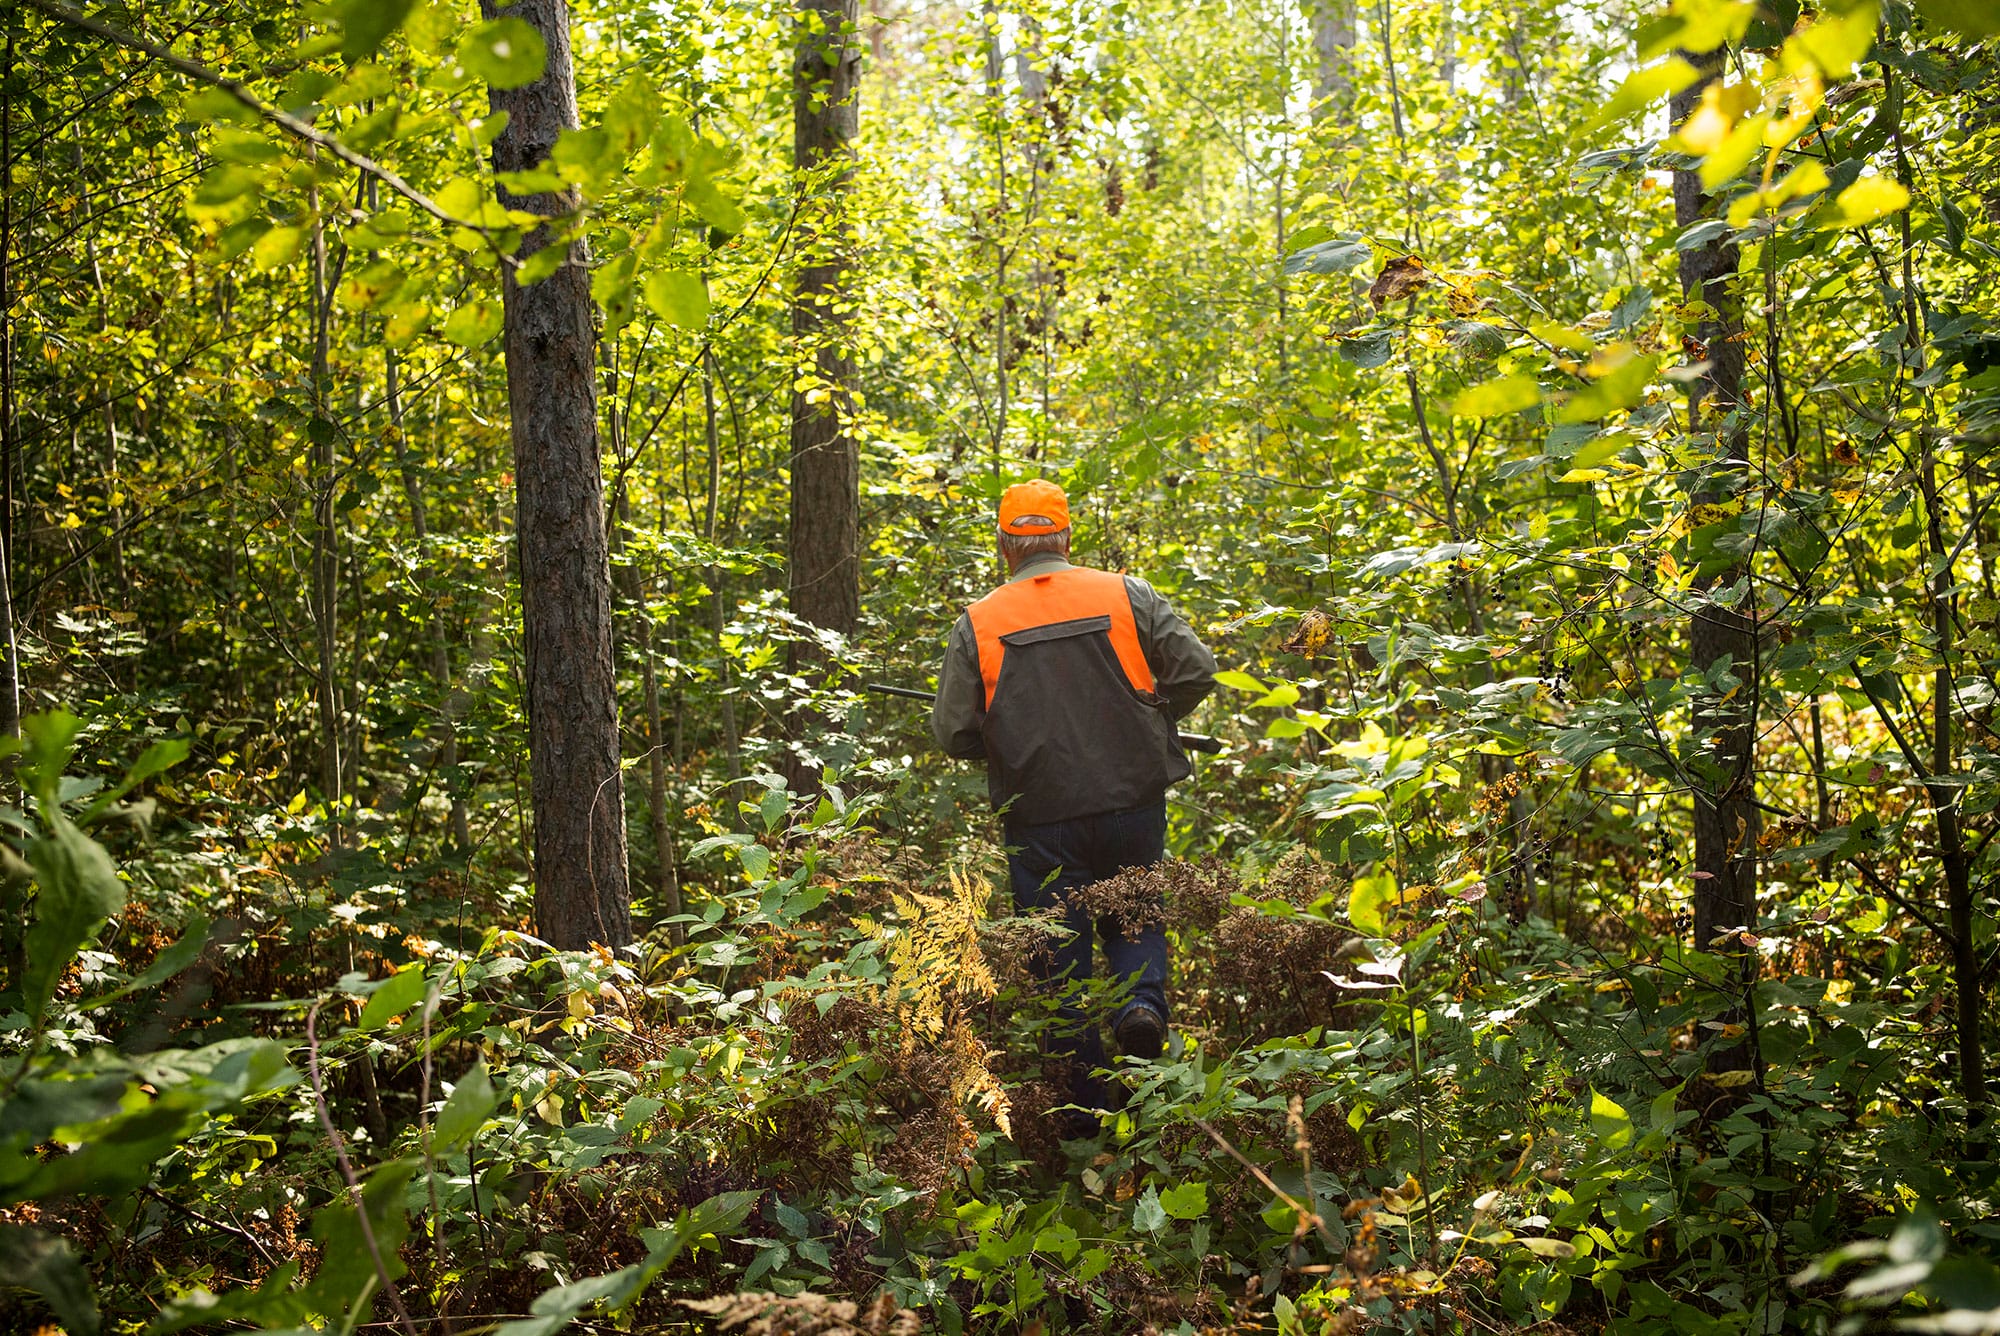 A hunter walking through a wooded area.